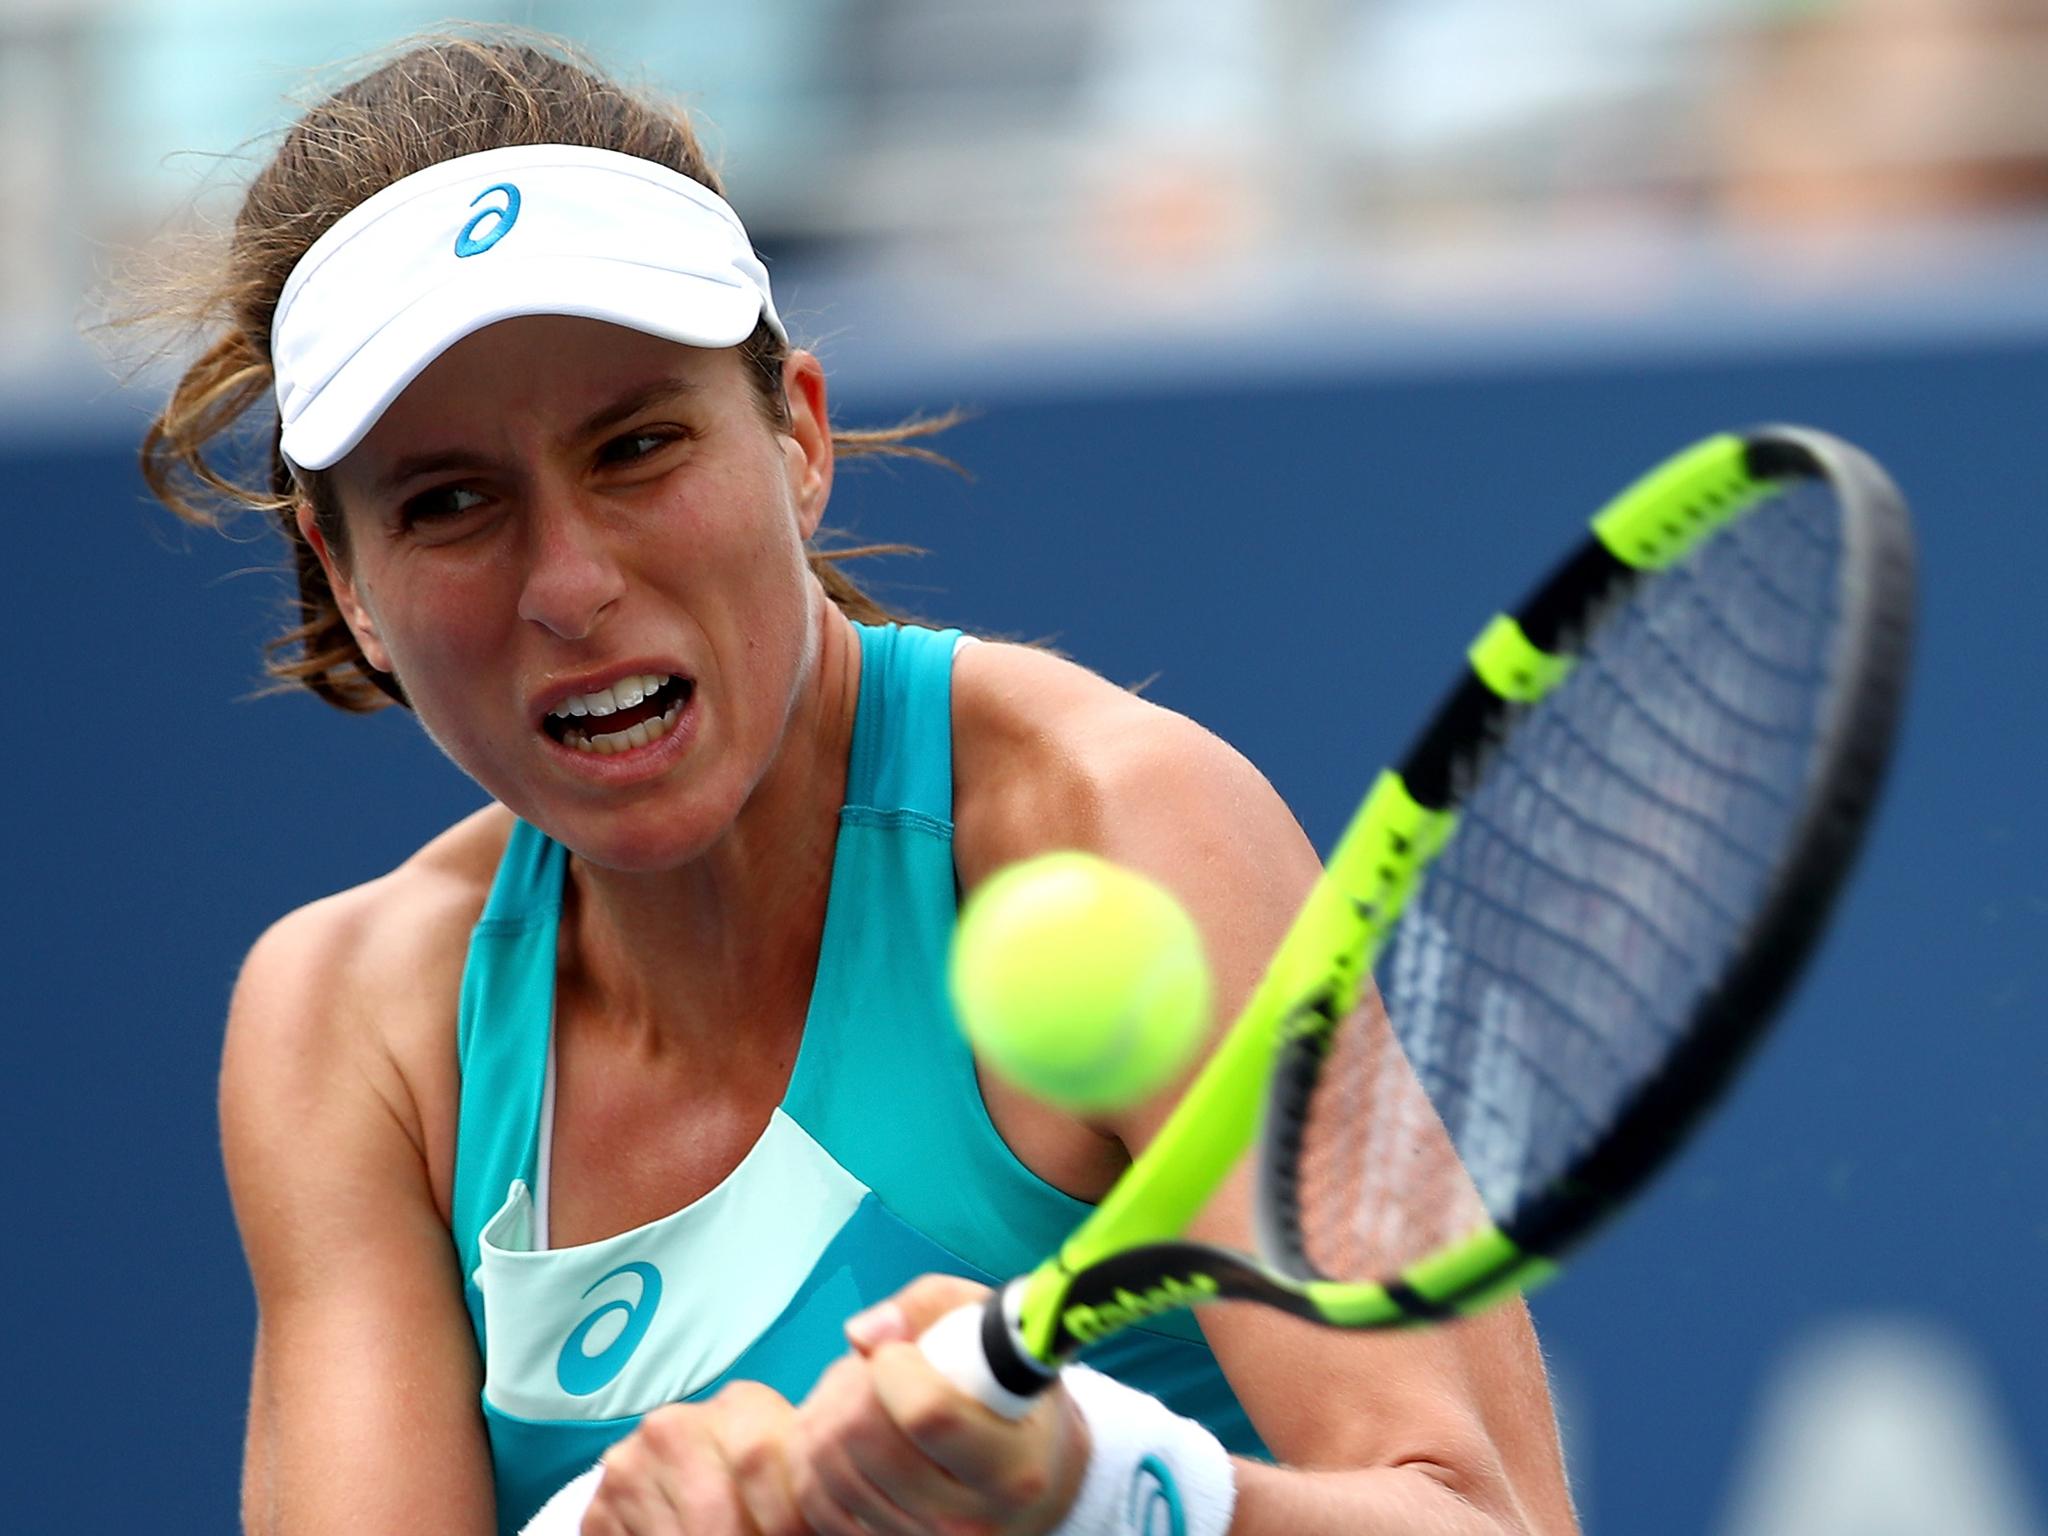 Johanna Konta has been knocked out of the US Open by unseeded Serbian Aleksandra Krunic